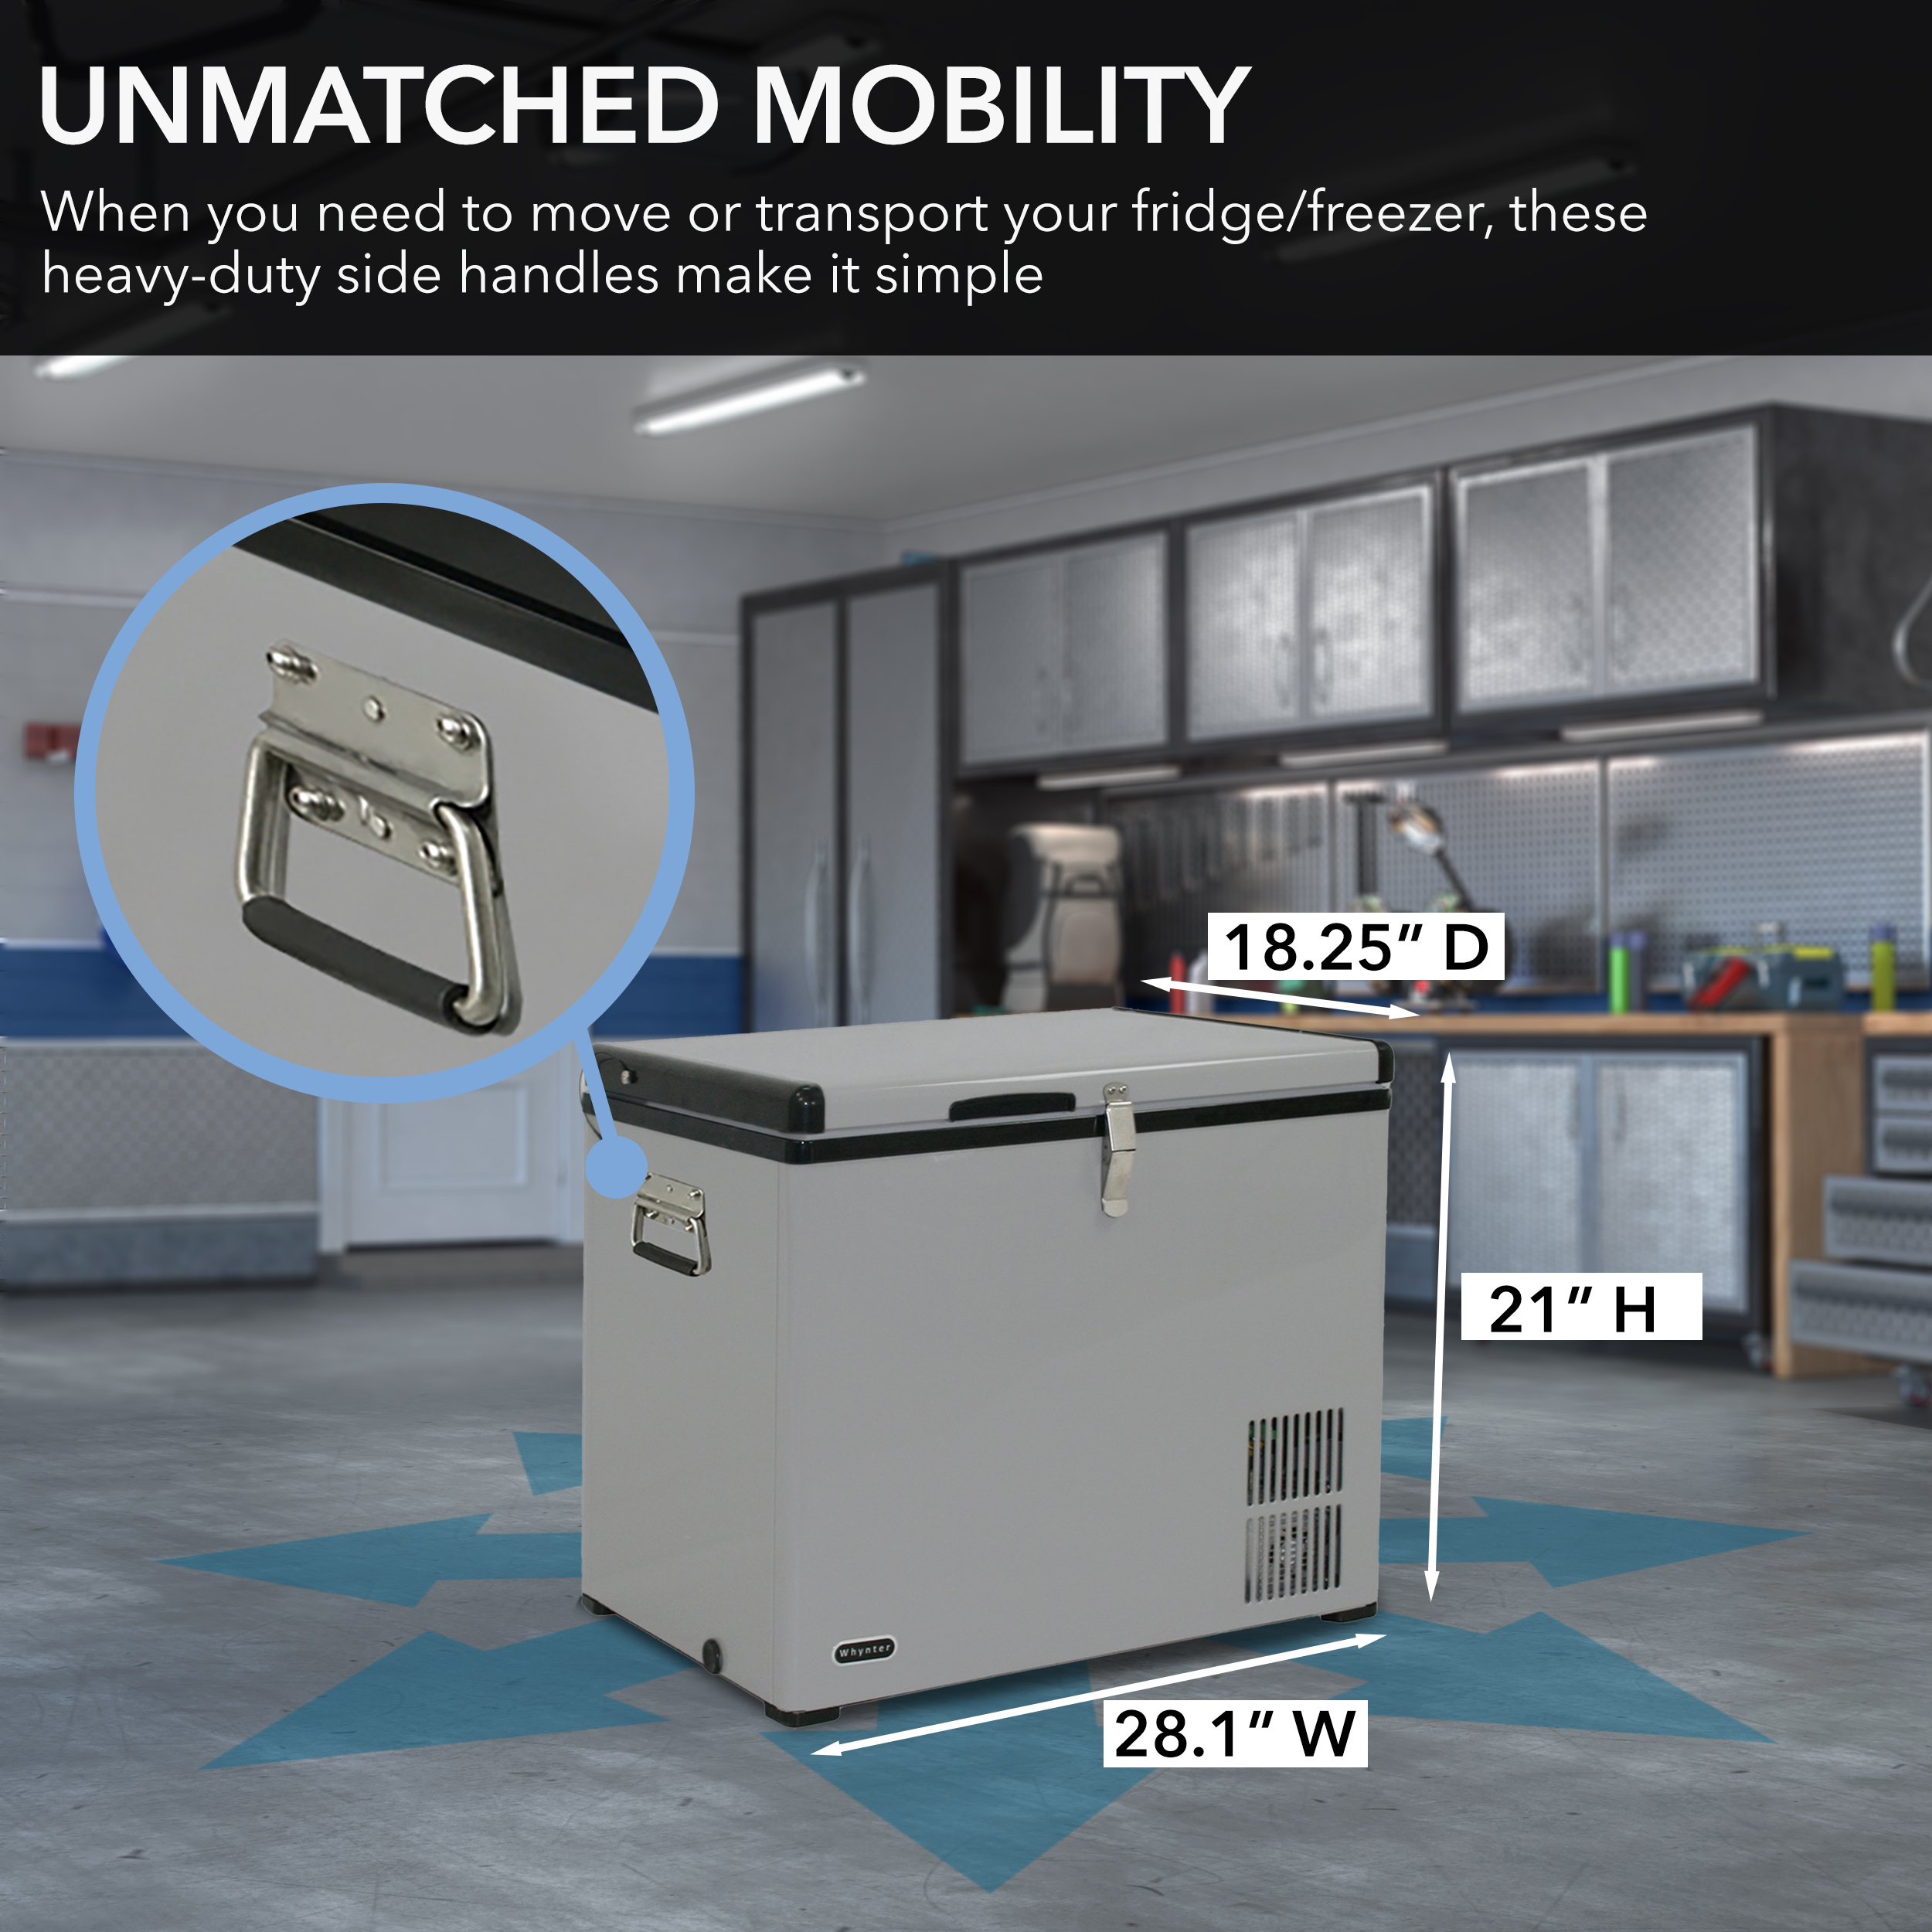 https://www.whynter.com/wp-content/uploads/FM-65G-UNMATCHED-MOBILITY.jpg